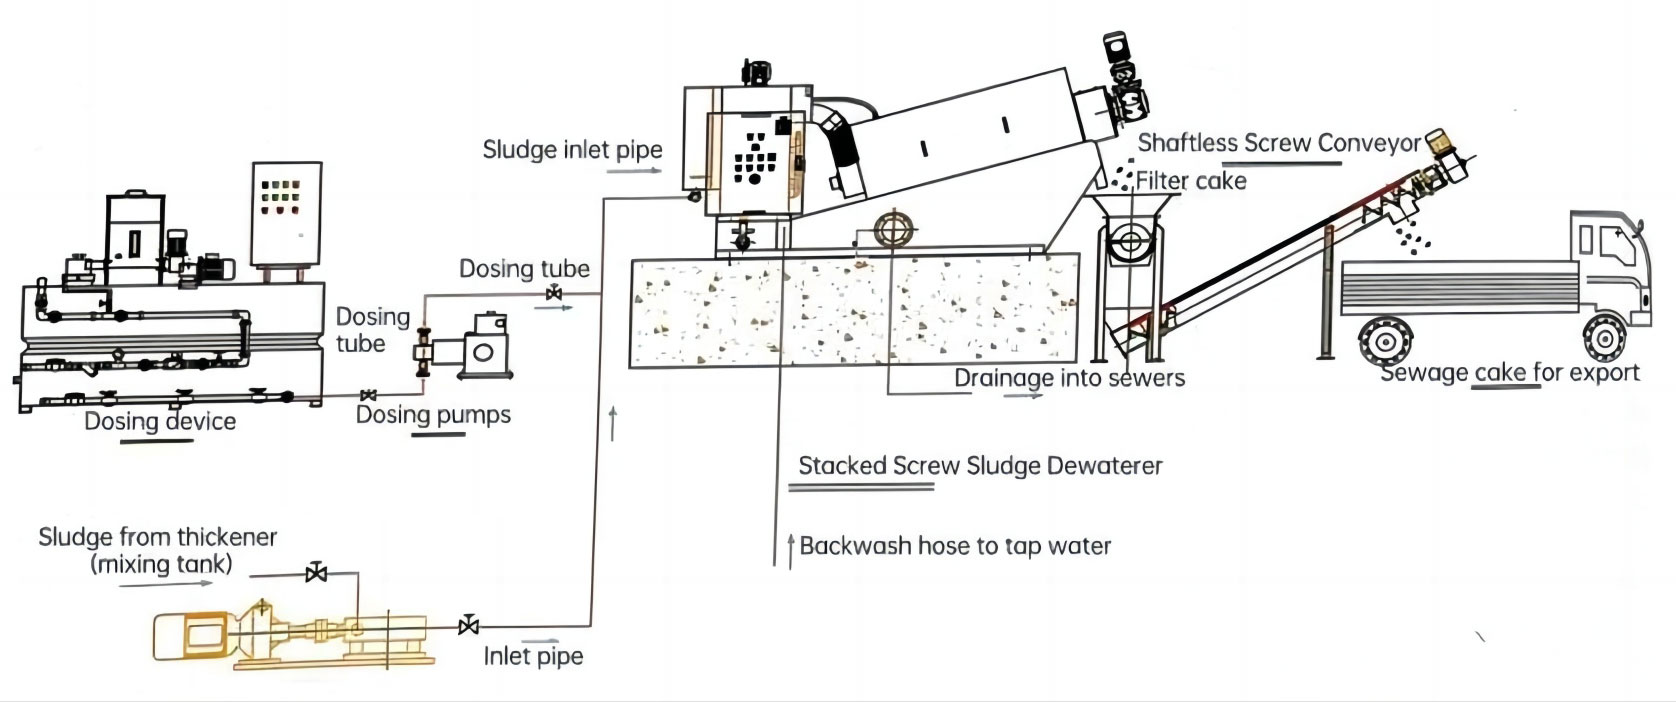 Innovative Applications of Sludge Dewatering Machines in Building Projects